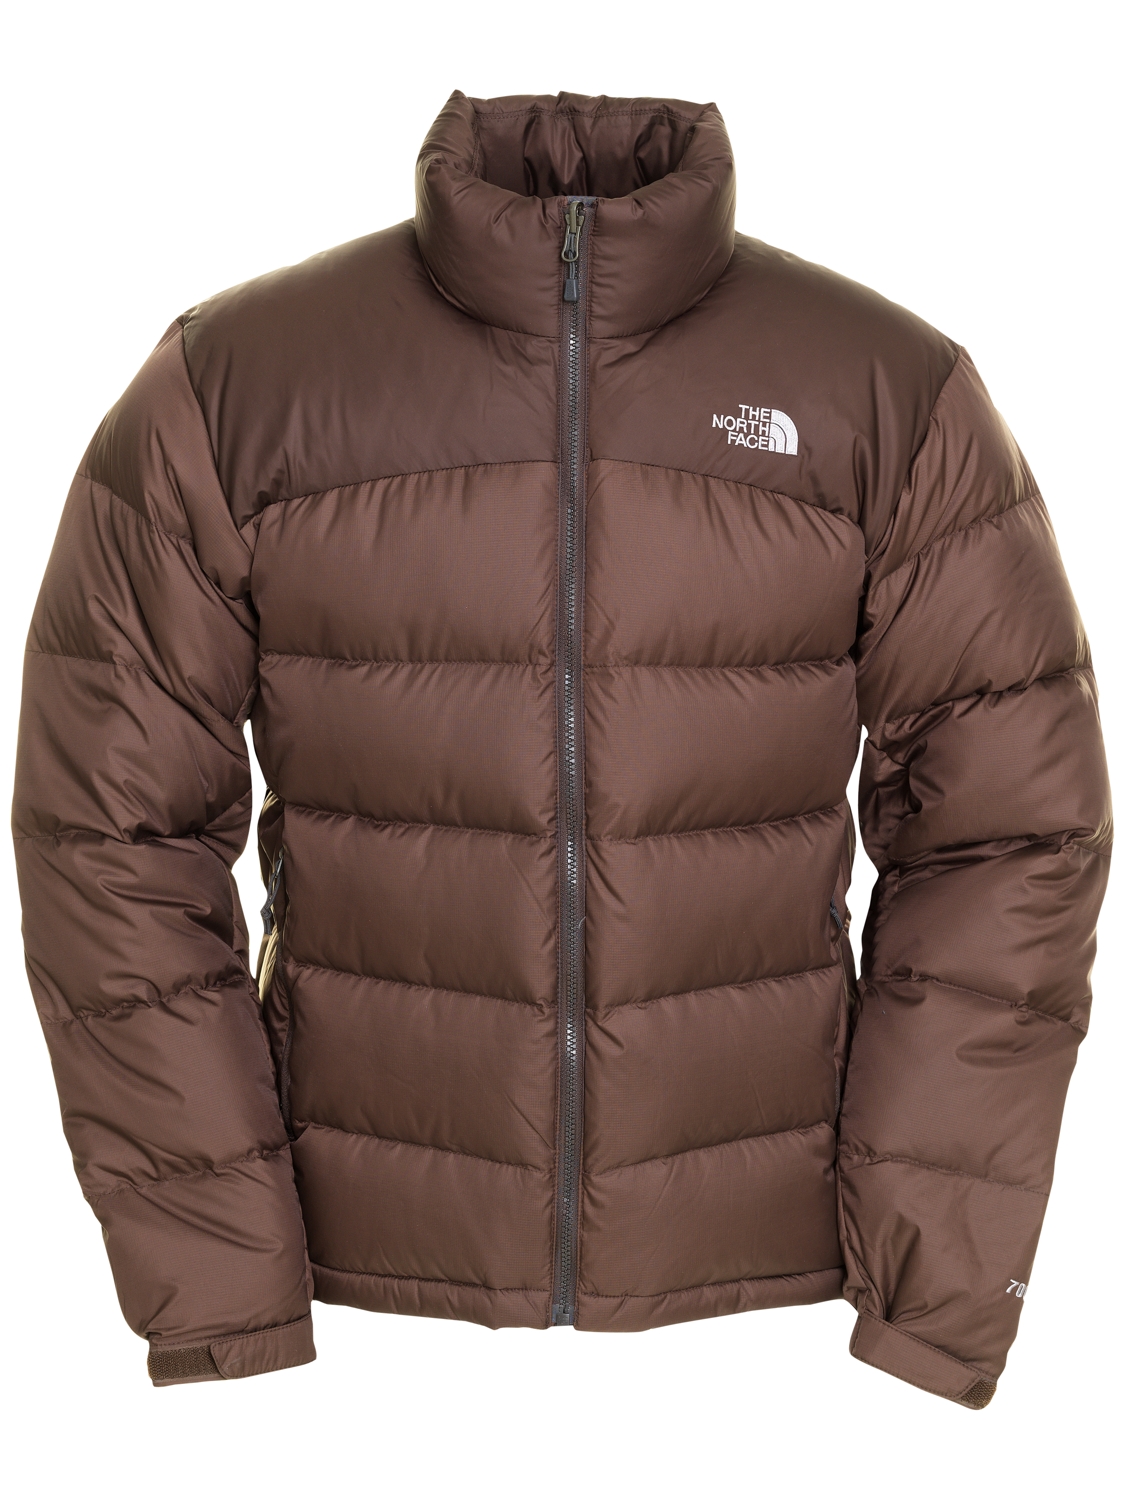 The North Face The North Face Mens Nuptse 2 Jacket Bittersweet Brown ...